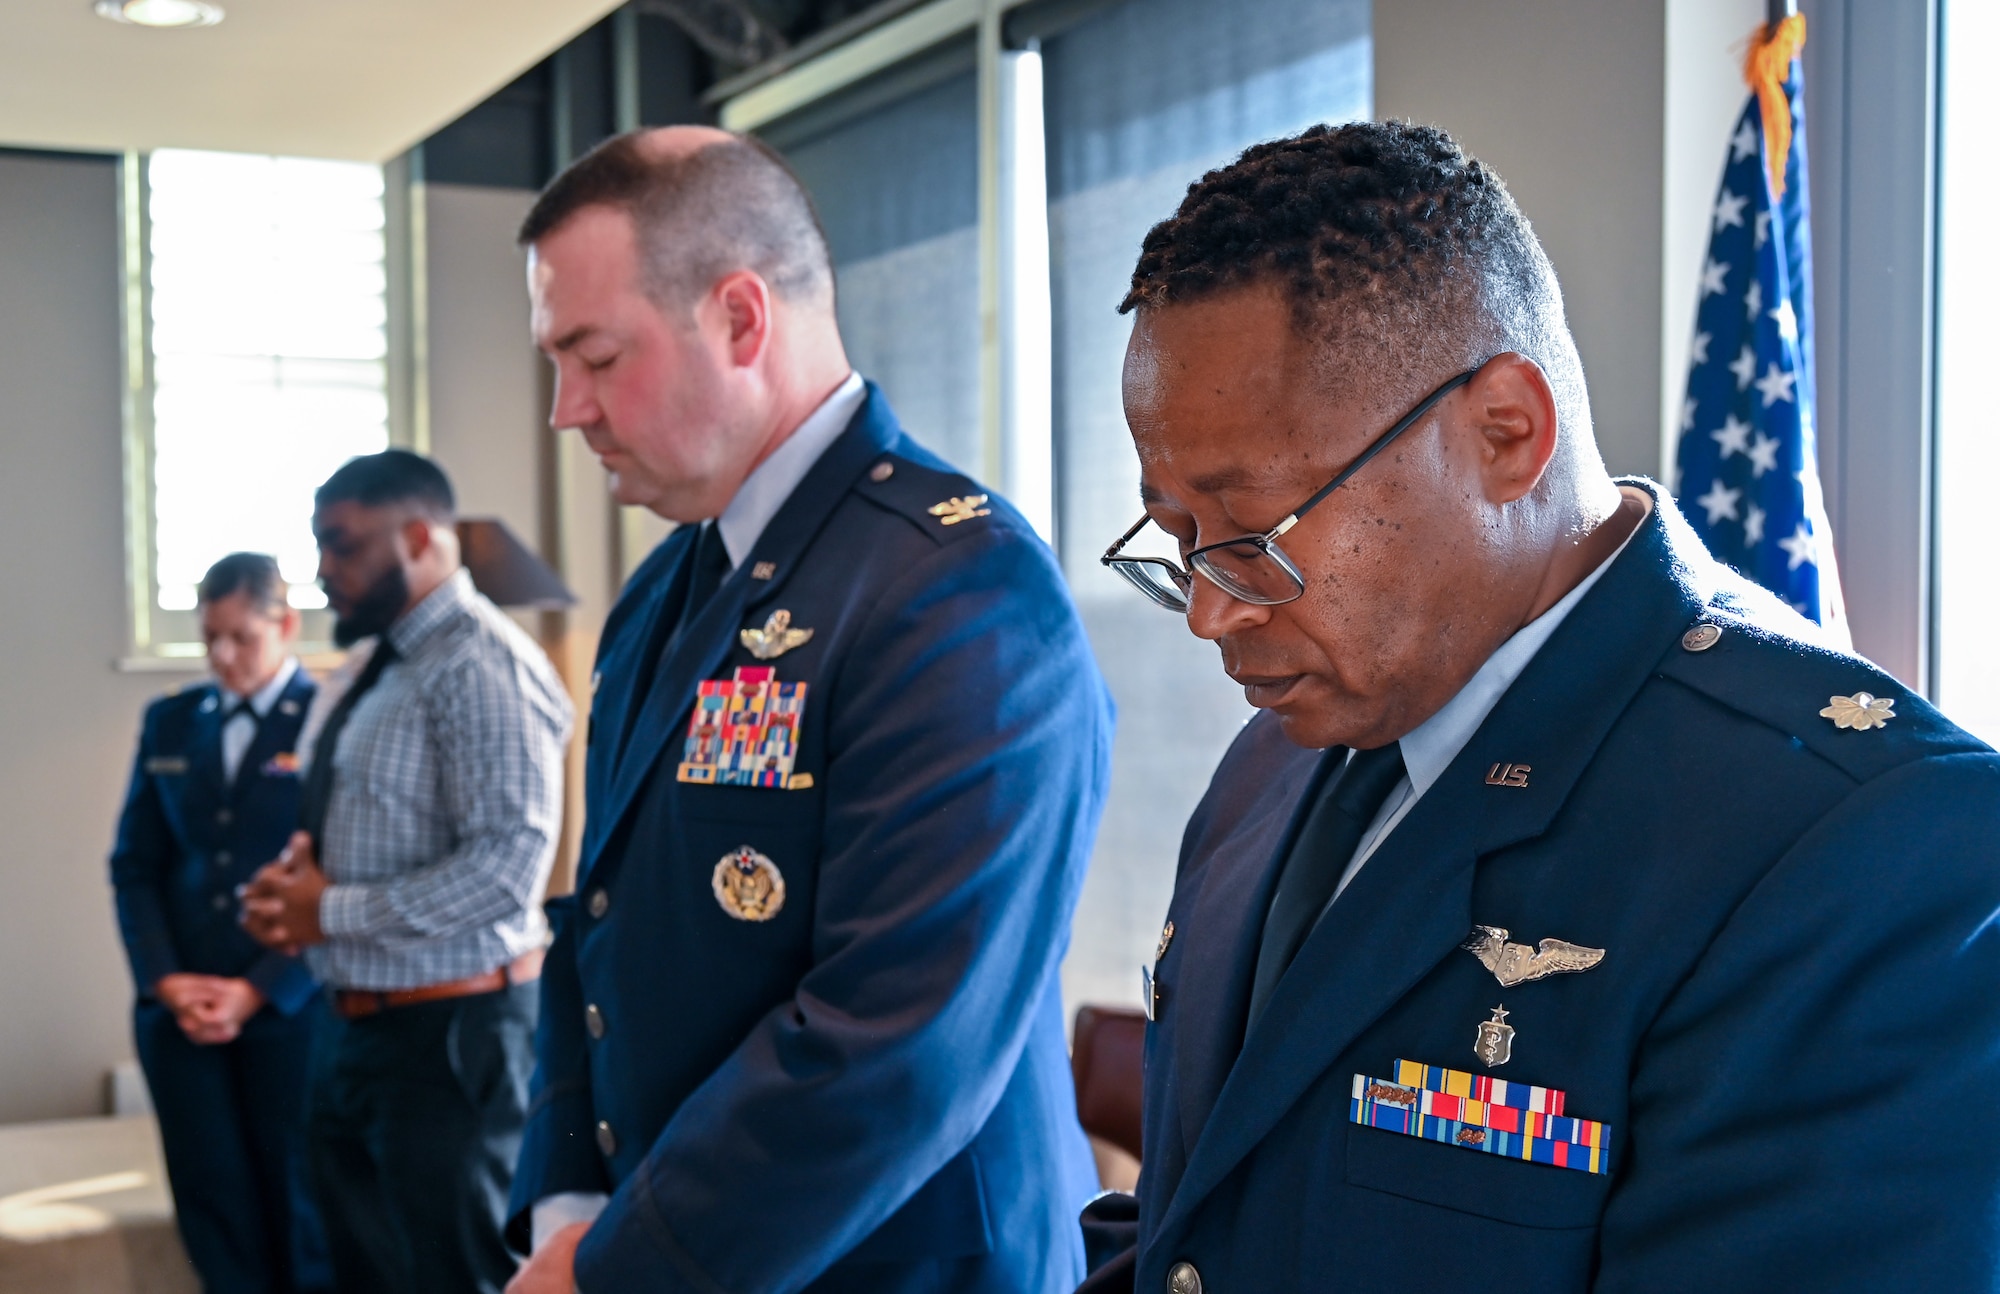 Lt. Col. Alvin Bradford, 507th Medical Squadron commander, promotes to the rank of colonel during a promotion ceremony September 30, 2022, Oklahoma City, Oklahoma. (U.S. Air Force photo by 2nd Lt. Mary Begy)